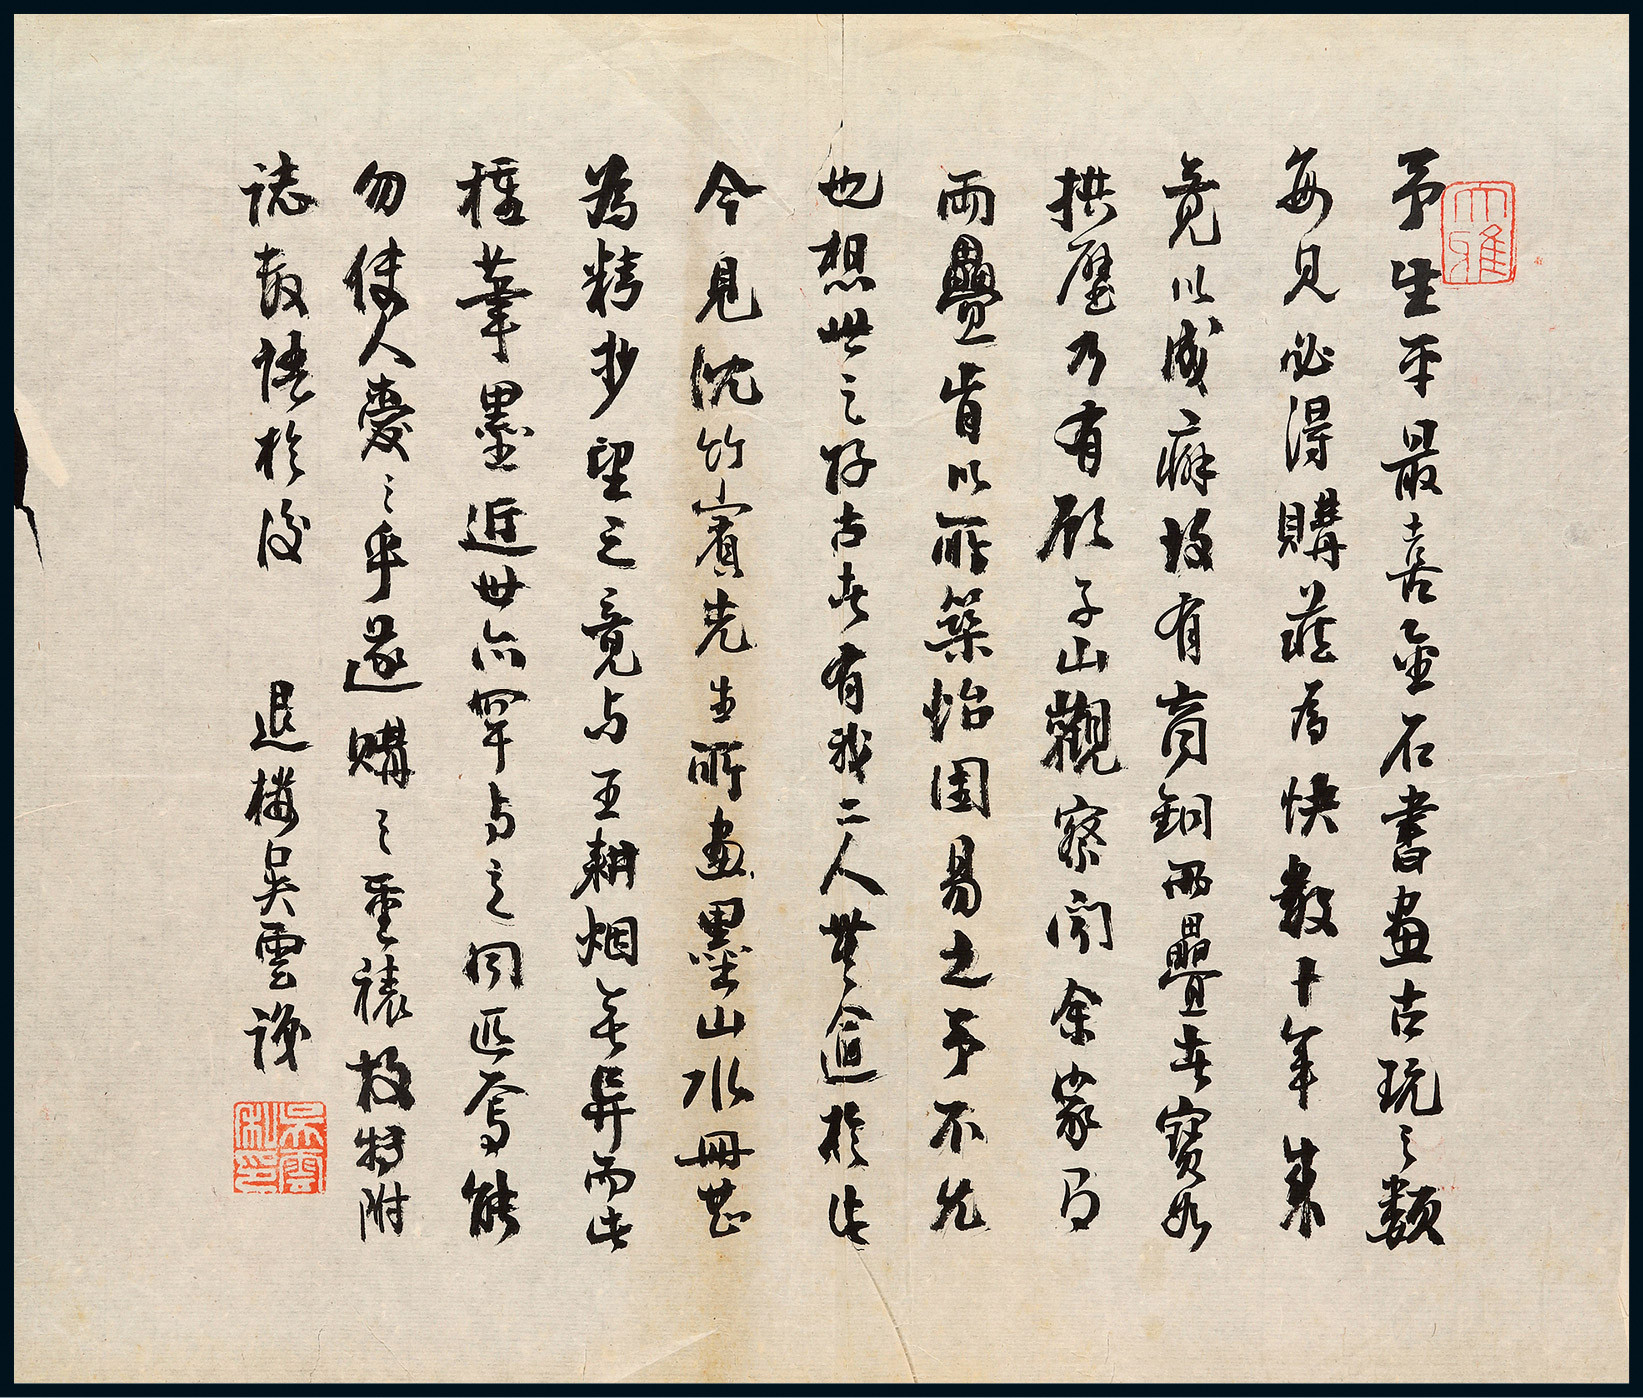 Poems composed by Wu Yun